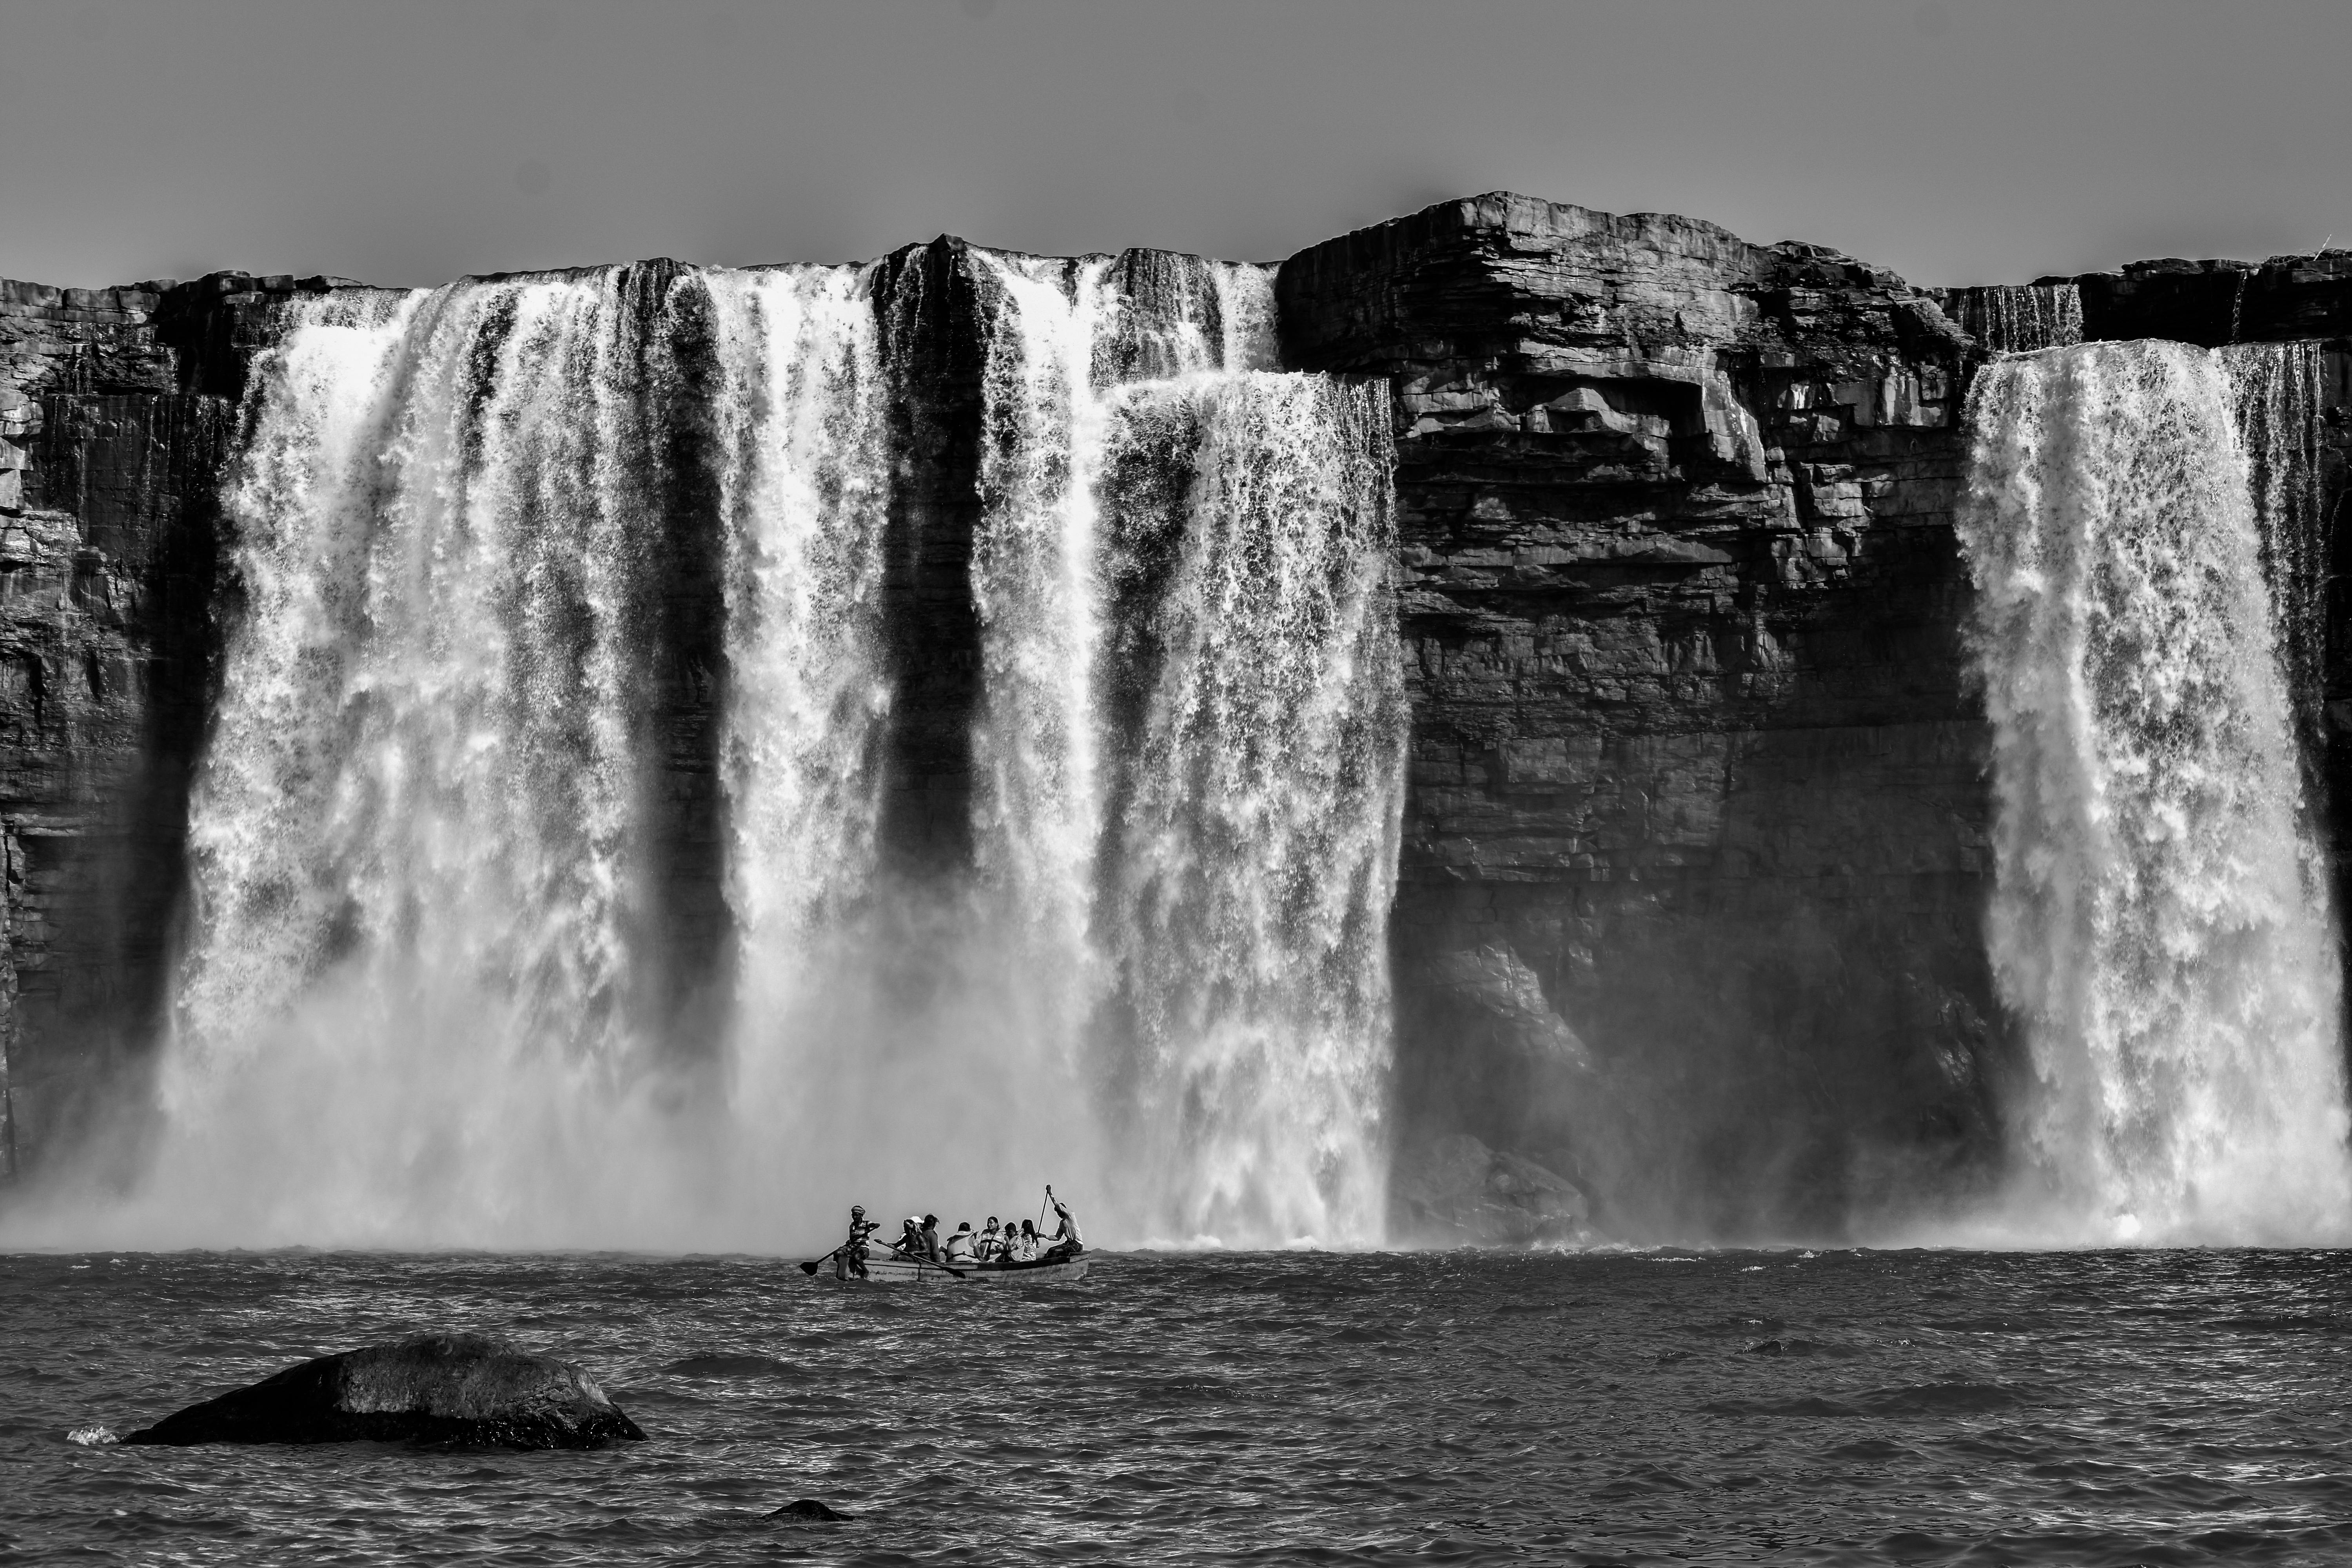 grayscale photography of people riding a boat near waterfalls